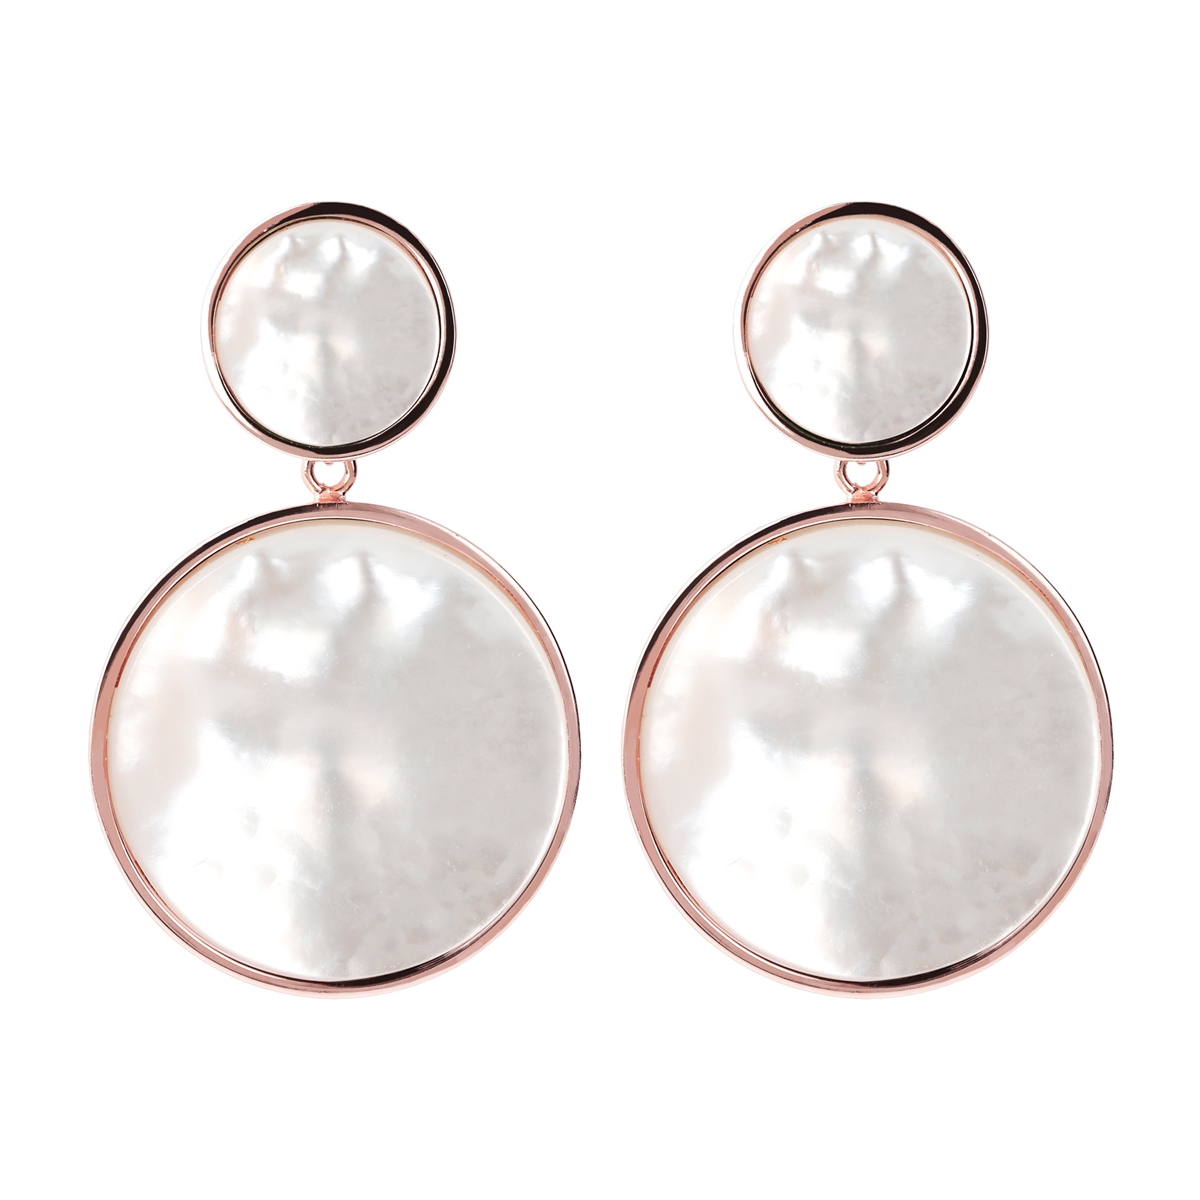 White Mother of Pearl Stud Earrings | EMPORIO ARMANI Woman